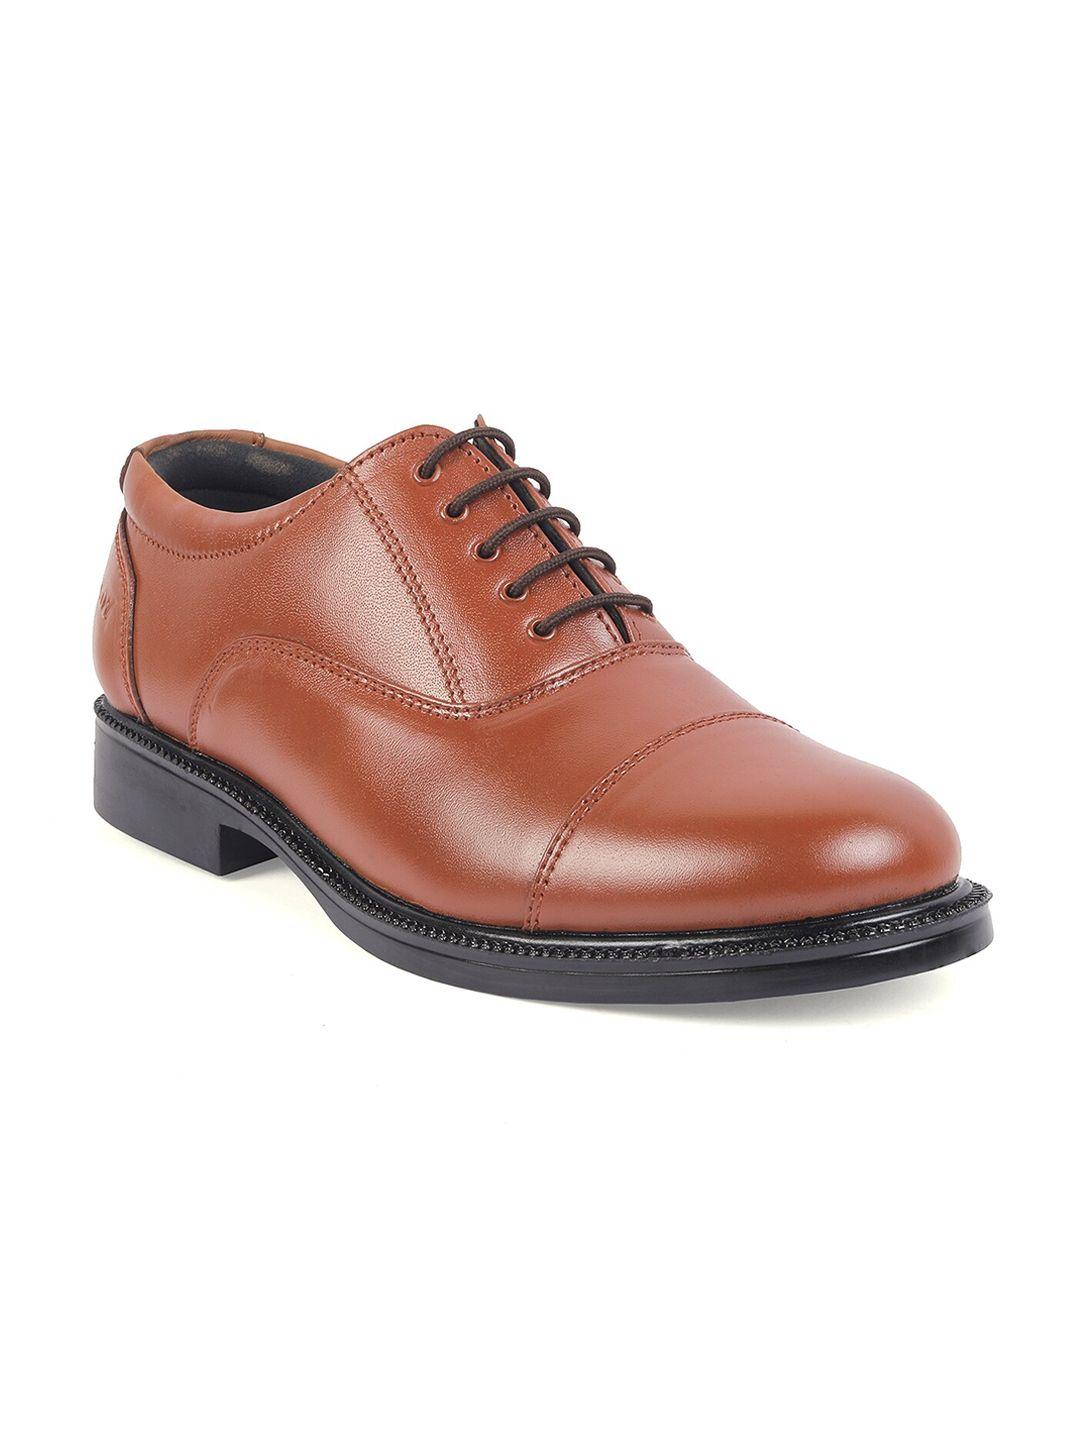 xhugoy men tan-coloured solid leather formal oxfords shoes